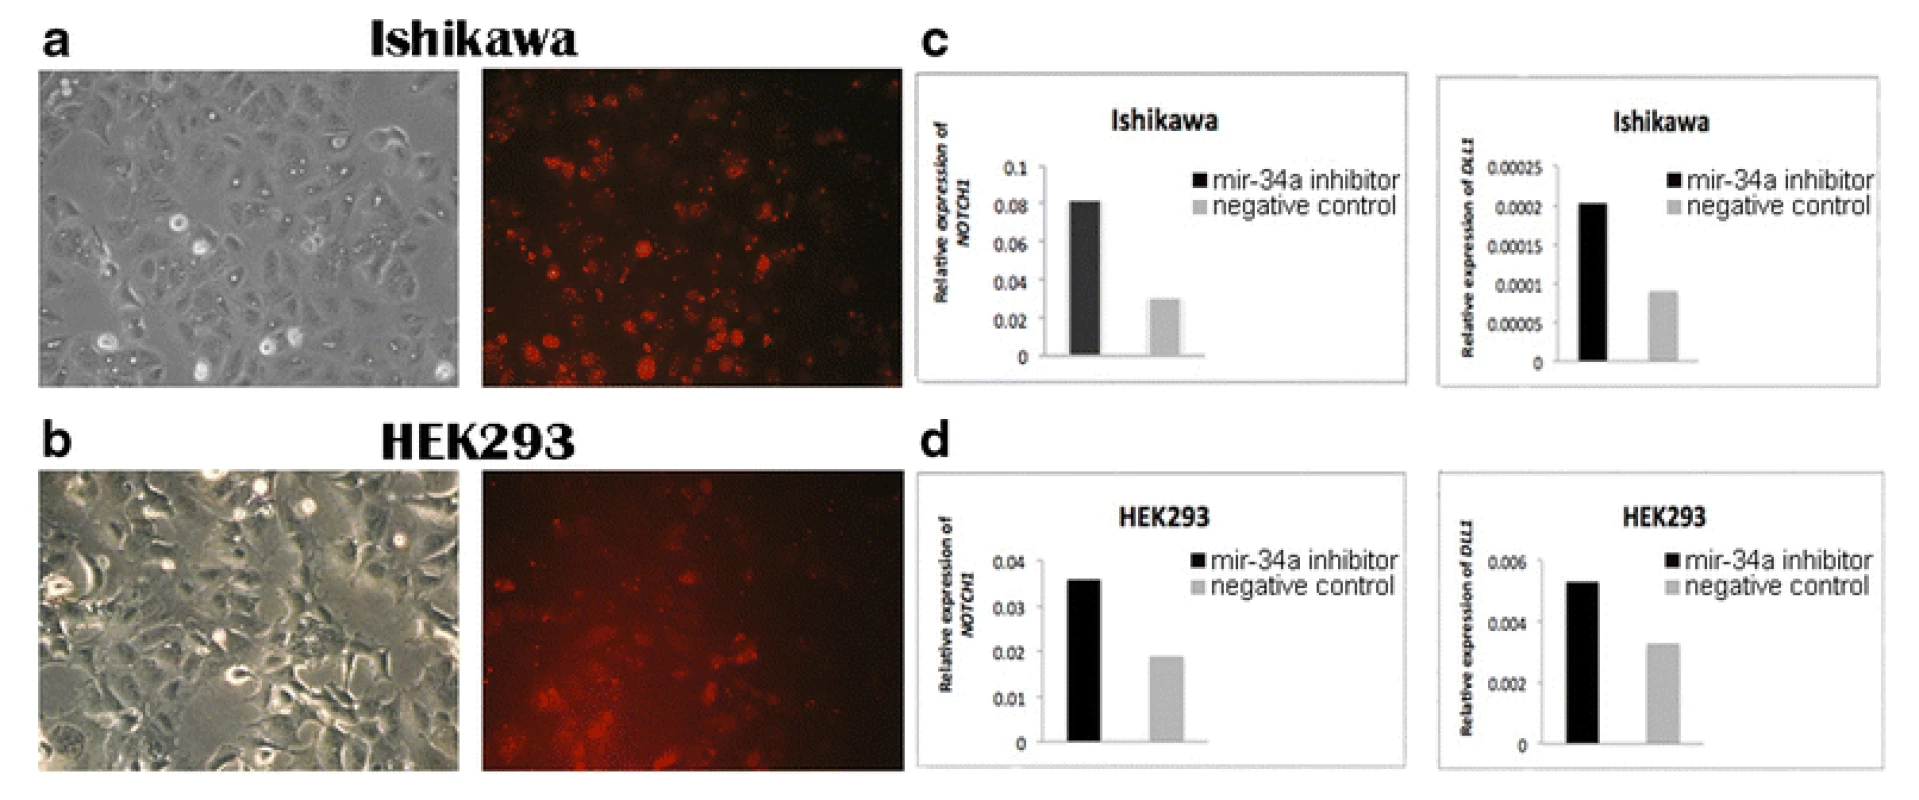 Detection of &lt;m&gt;NOTCH1&lt;/m&gt; and &lt;m&gt;DLL1&lt;/m&gt; expression in transfected Ishikawa and HEK293 cell lines. BLOCK-iT Alexa Fluor red fluorescent and mir-34a inhibitor transfection in (&lt;b&gt;a&lt;/b&gt;) Ishikawa cells and (&lt;b&gt;b&lt;/b&gt;) HEK293 cells. The photos were taken 24 h after transfection corresponding to morphology of cells (left) and BLOCK-iT Alexa Fluor red fluorescent (right). &lt;b&gt;c&lt;/b&gt; The level of &lt;m&gt;NOTCH1&lt;/m&gt; and &lt;m&gt;DLL1&lt;/m&gt; expression in Ishikawa cells 48 h after transfection with mir-34a inhibitor compared with the negative control. &lt;b&gt;d&lt;/b&gt; The level of &lt;m&gt;NOTCH1&lt;/m&gt; and &lt;m&gt;DLL1&lt;/m&gt; expression in HEK293 cells 48 h after transfection with mir-34a inhibitor compared with the negative control